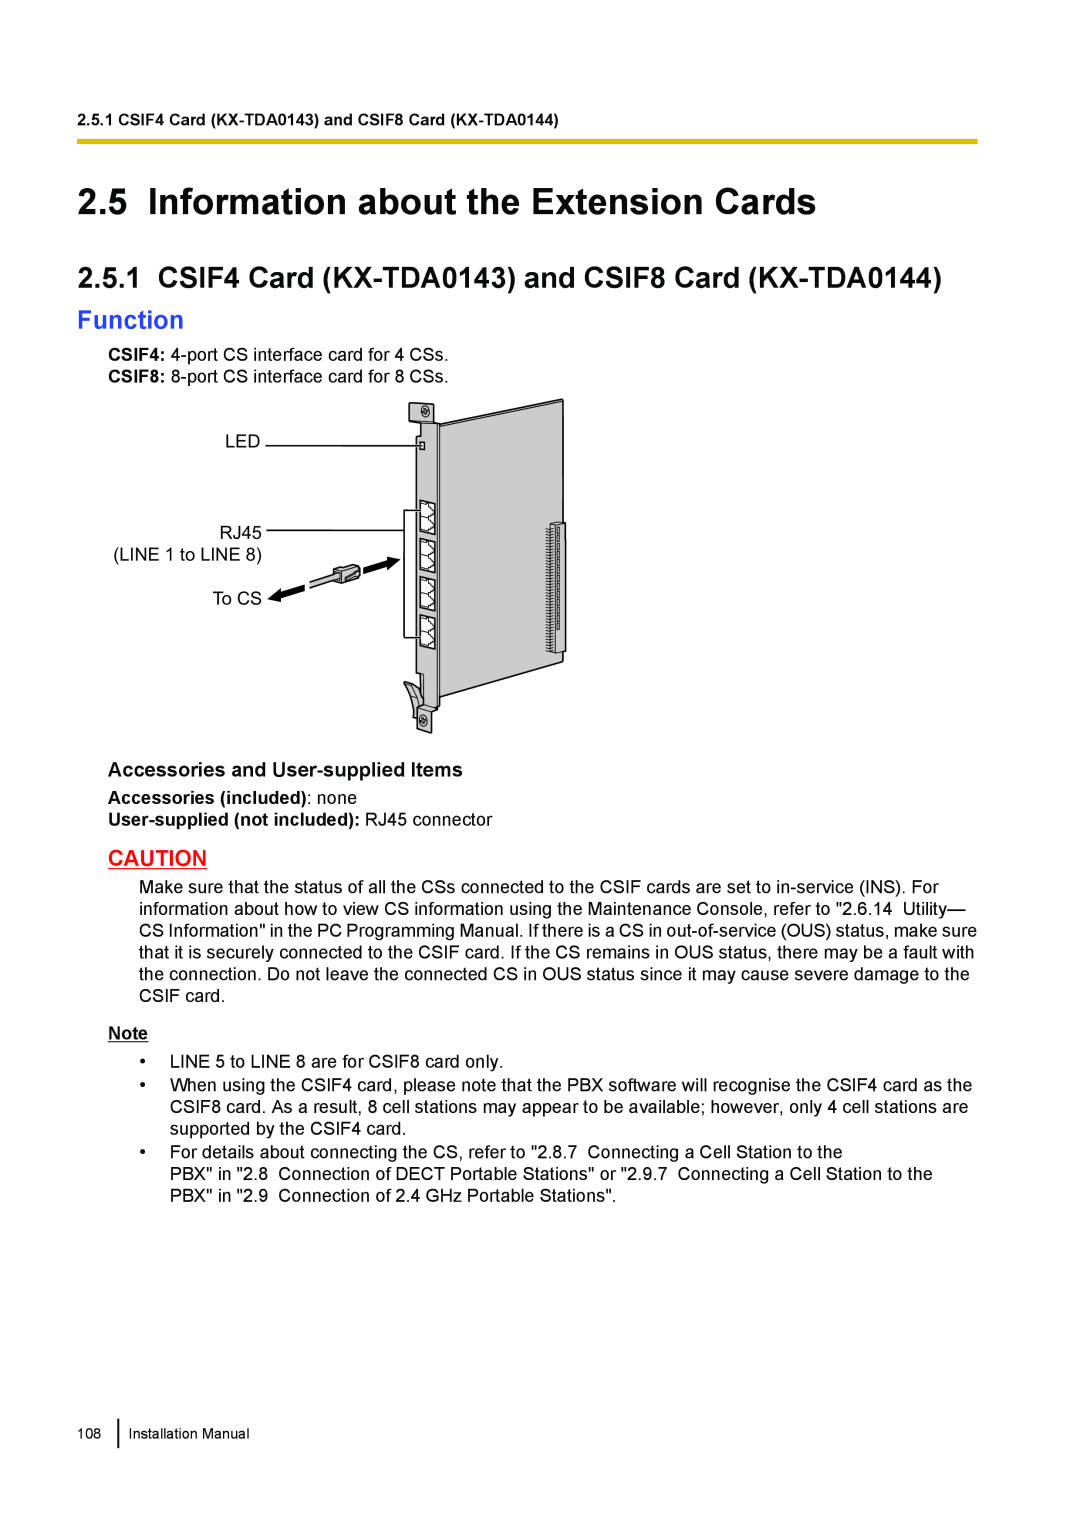 Panasonic KX-TDA100 Information about the Extension Cards, CSIF4 Card KX-TDA0143 and CSIF8 Card KX-TDA0144, Function 